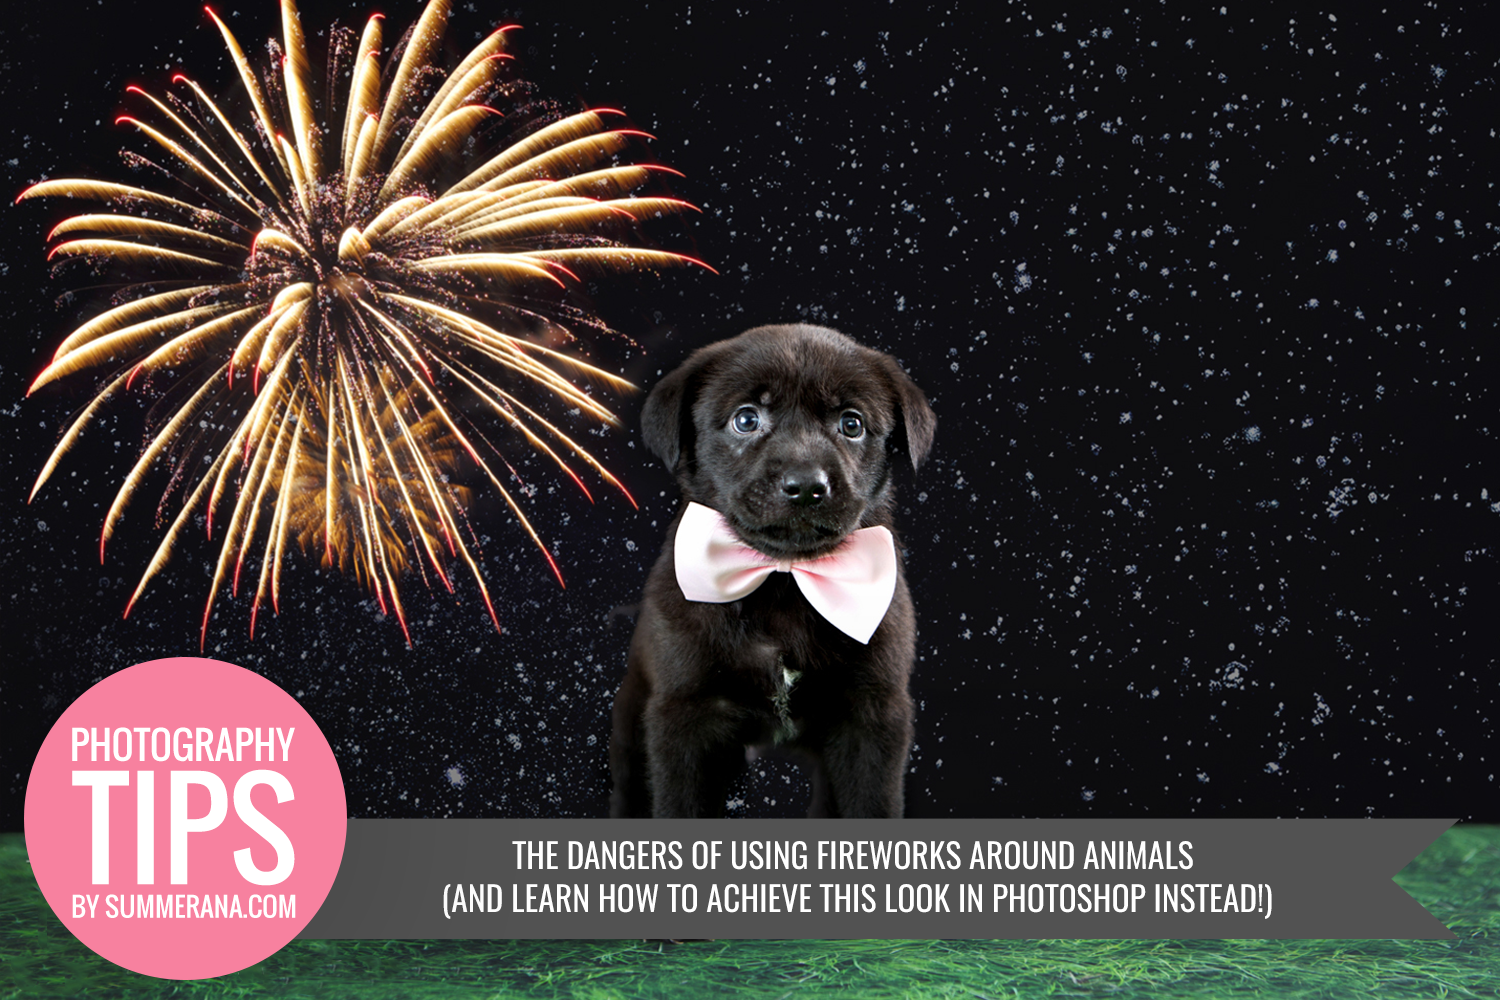 The-Dangers-of-Using-Fireworks-Around-Animals-And-Learn-How-to-Achieve-this-Look-in-Photoshop-Instead!